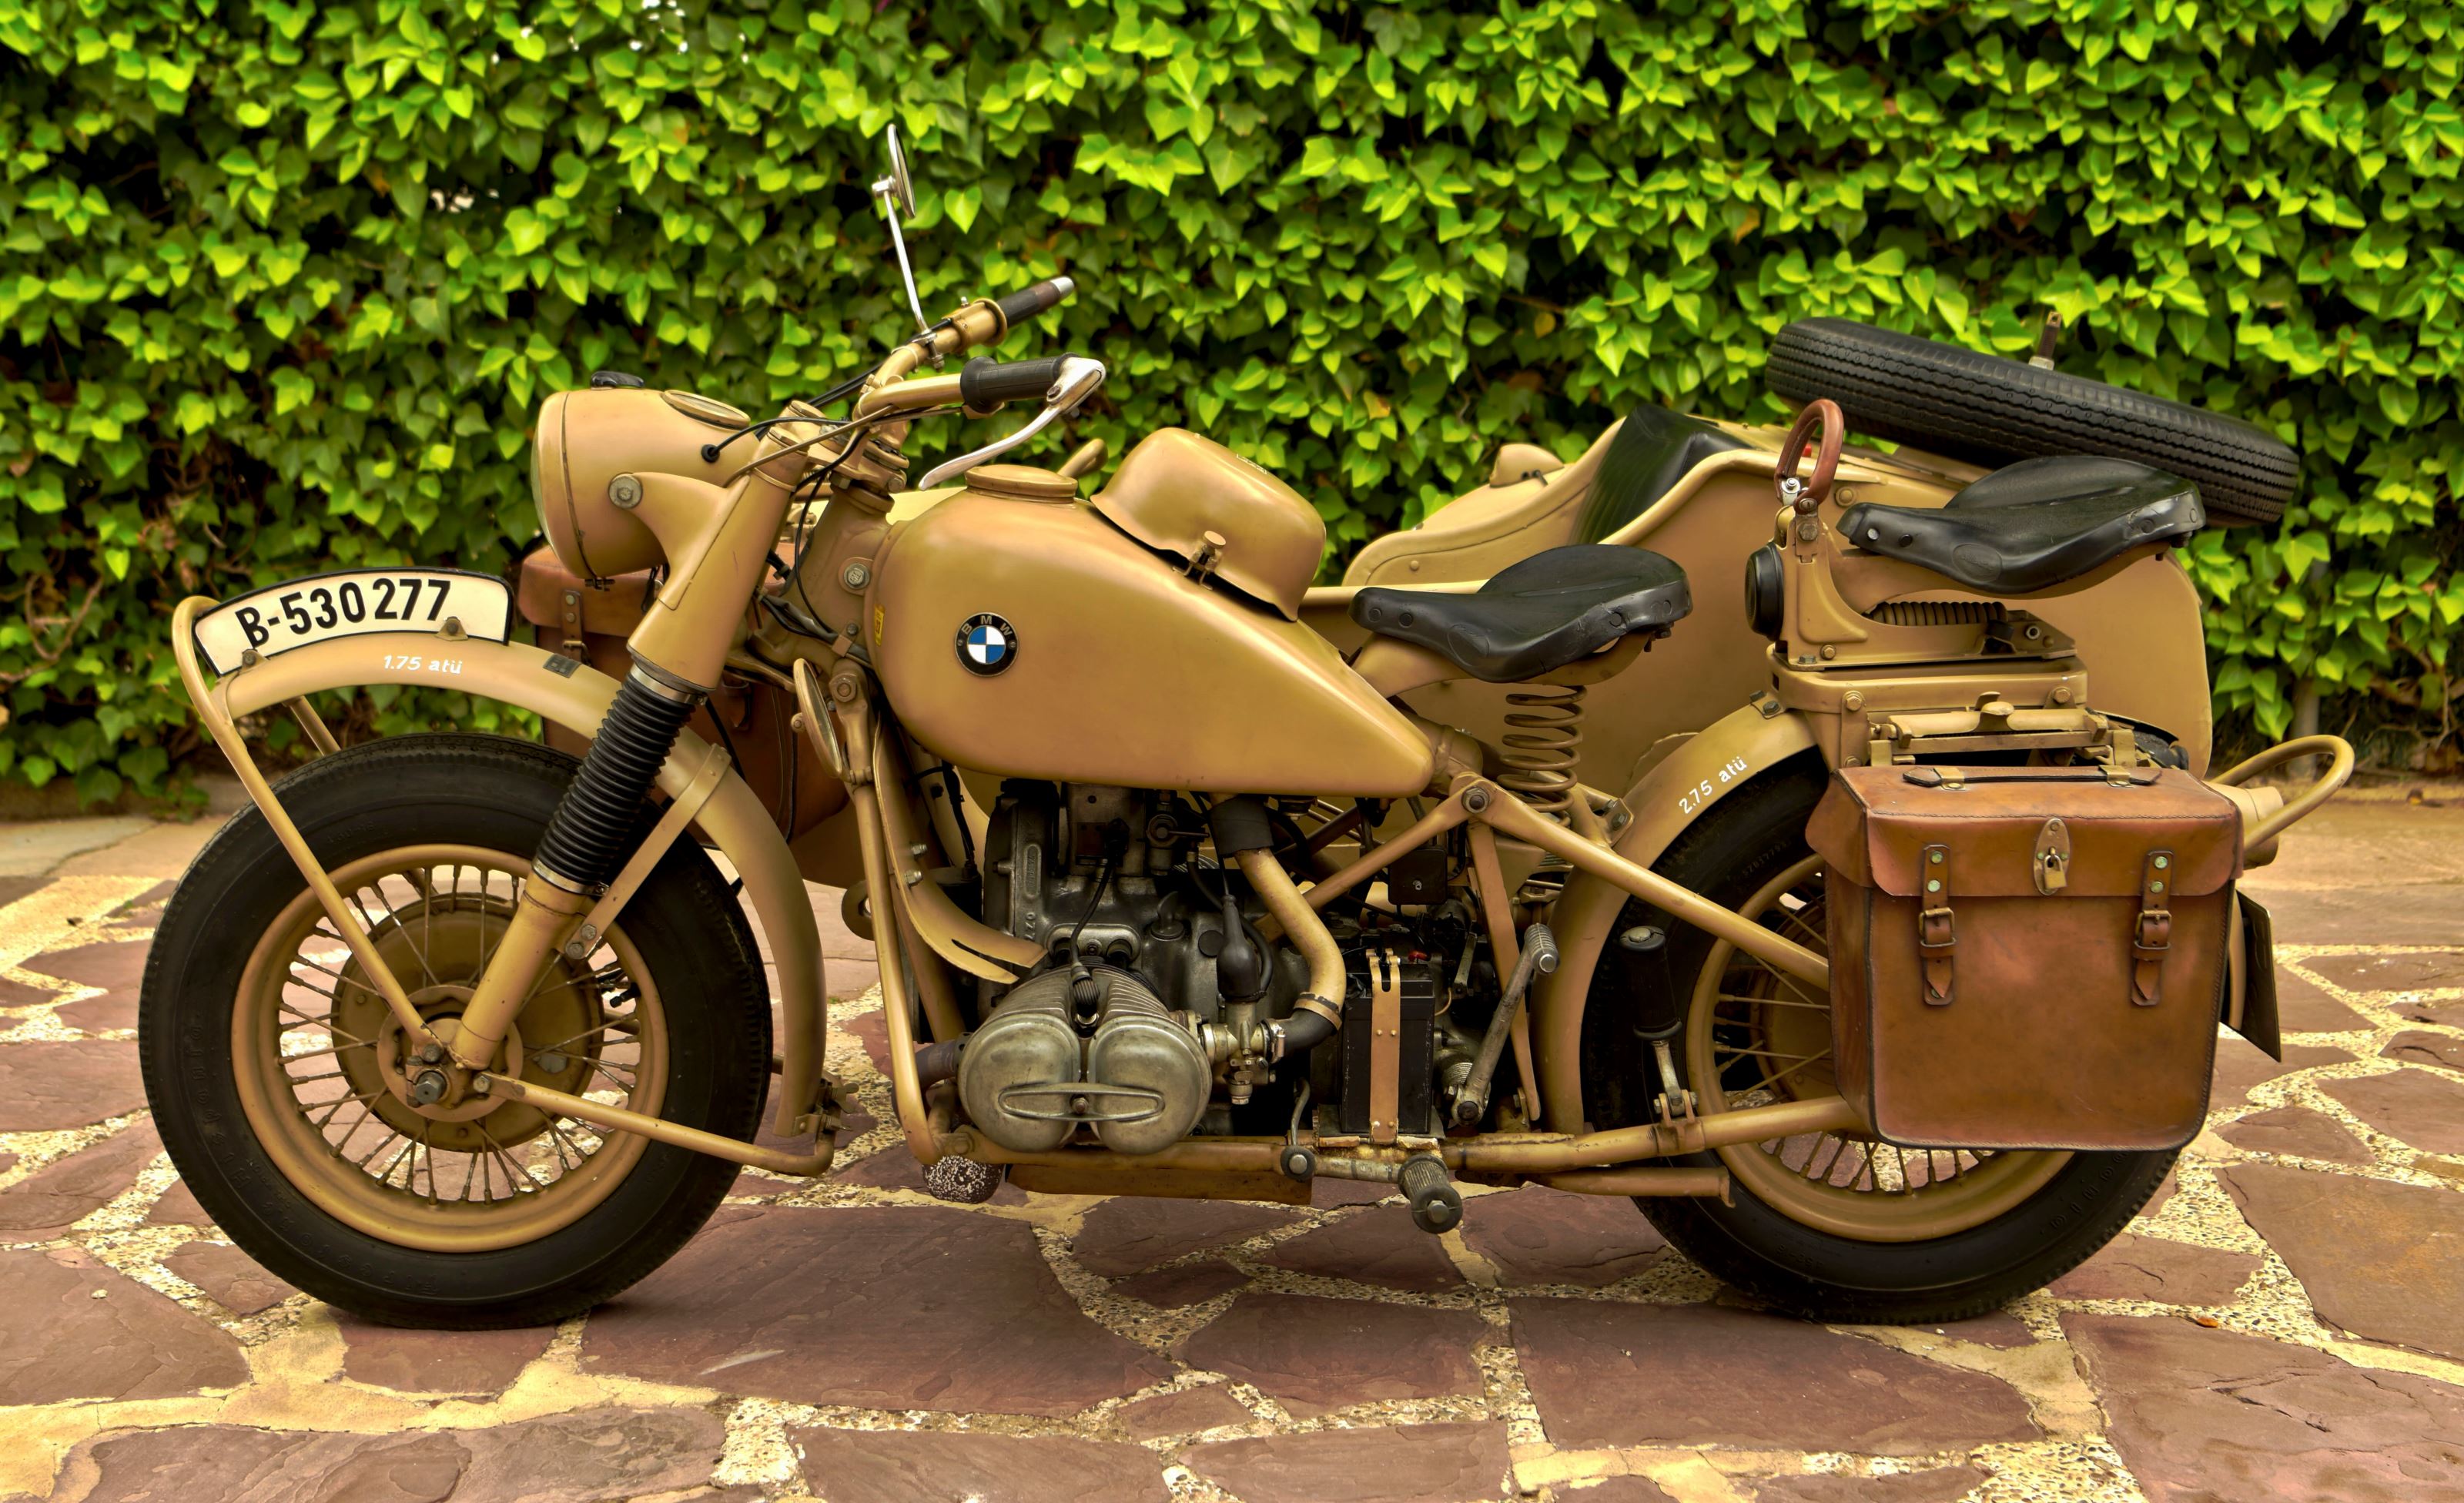 Bmw r75 750cc military motorcycle combination wehrmachtsgespann qne2yts4day61mrhxamxx